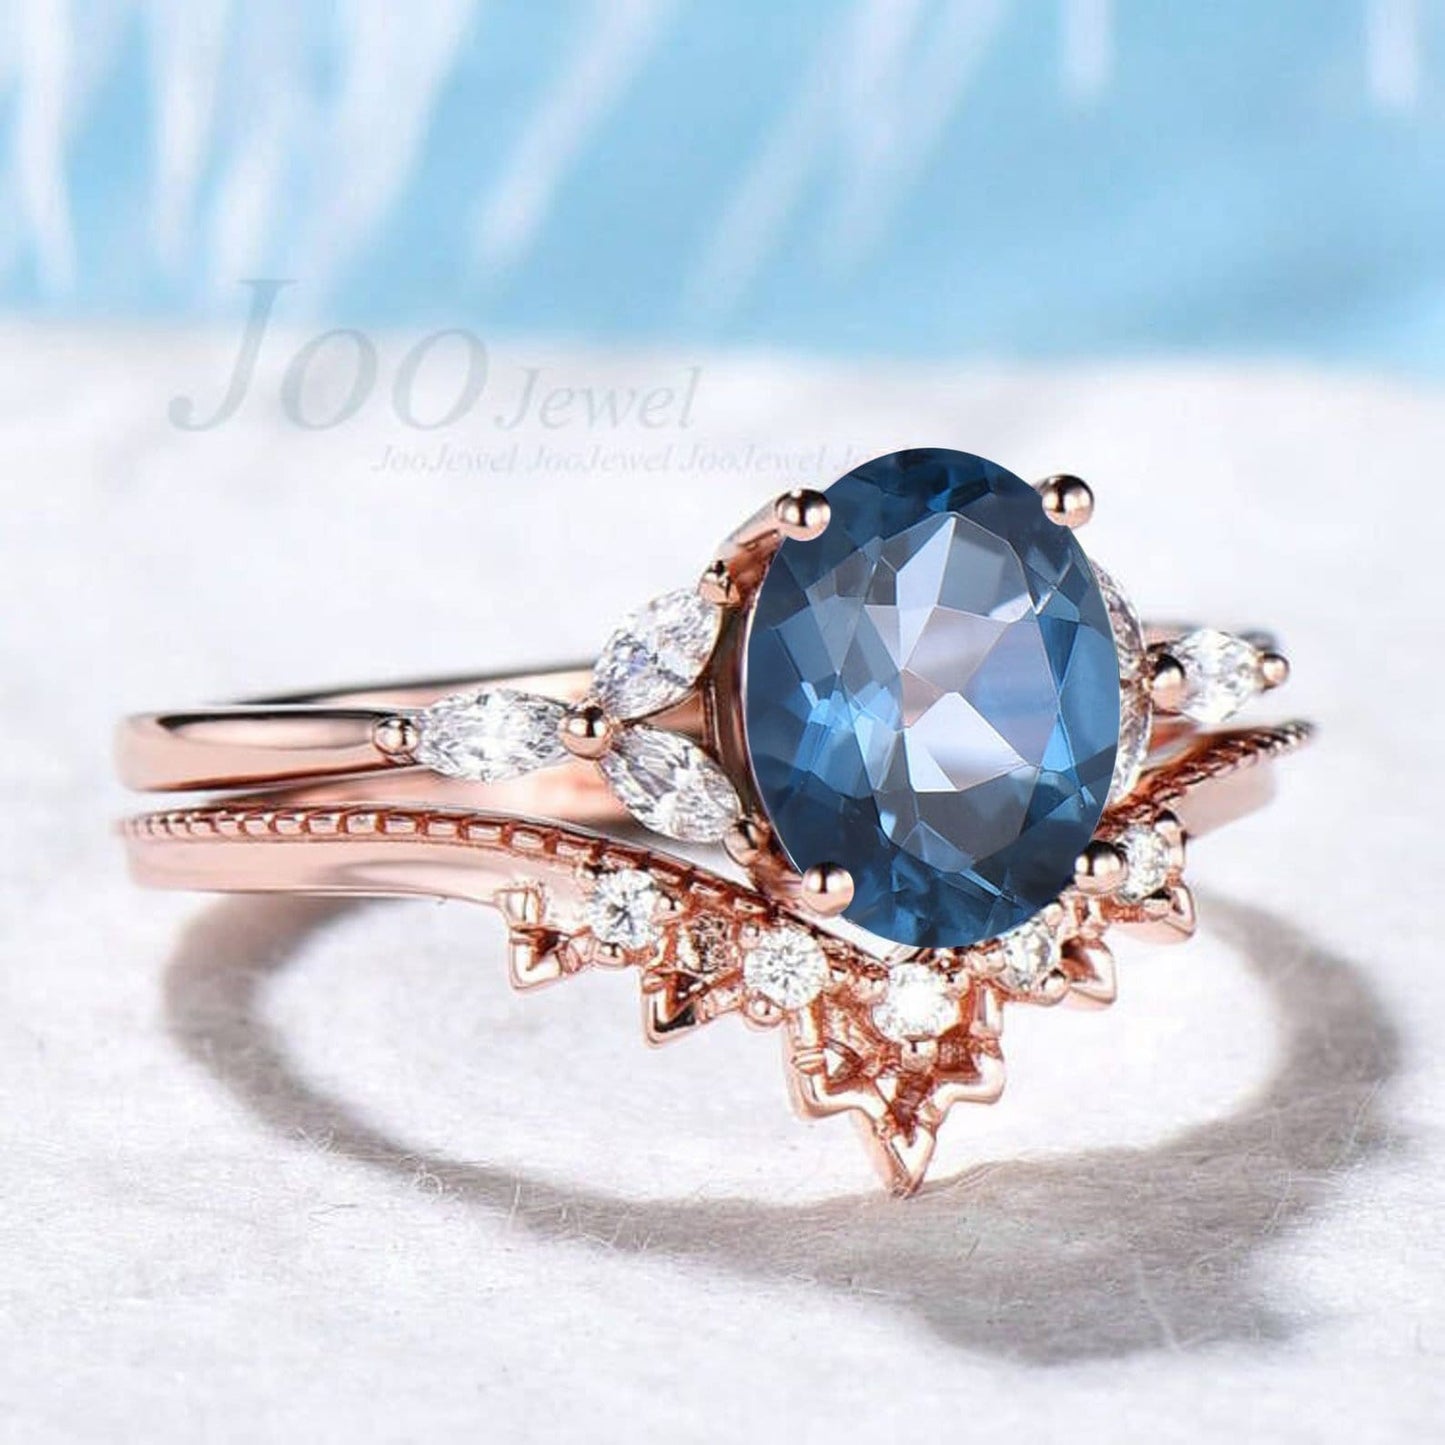 Sterling Silver Dainty Natural London Blue Topaz Engagement Ring Set December Birthstone Wedding Ring Topaz Gemstone Jewelry Gift for Her